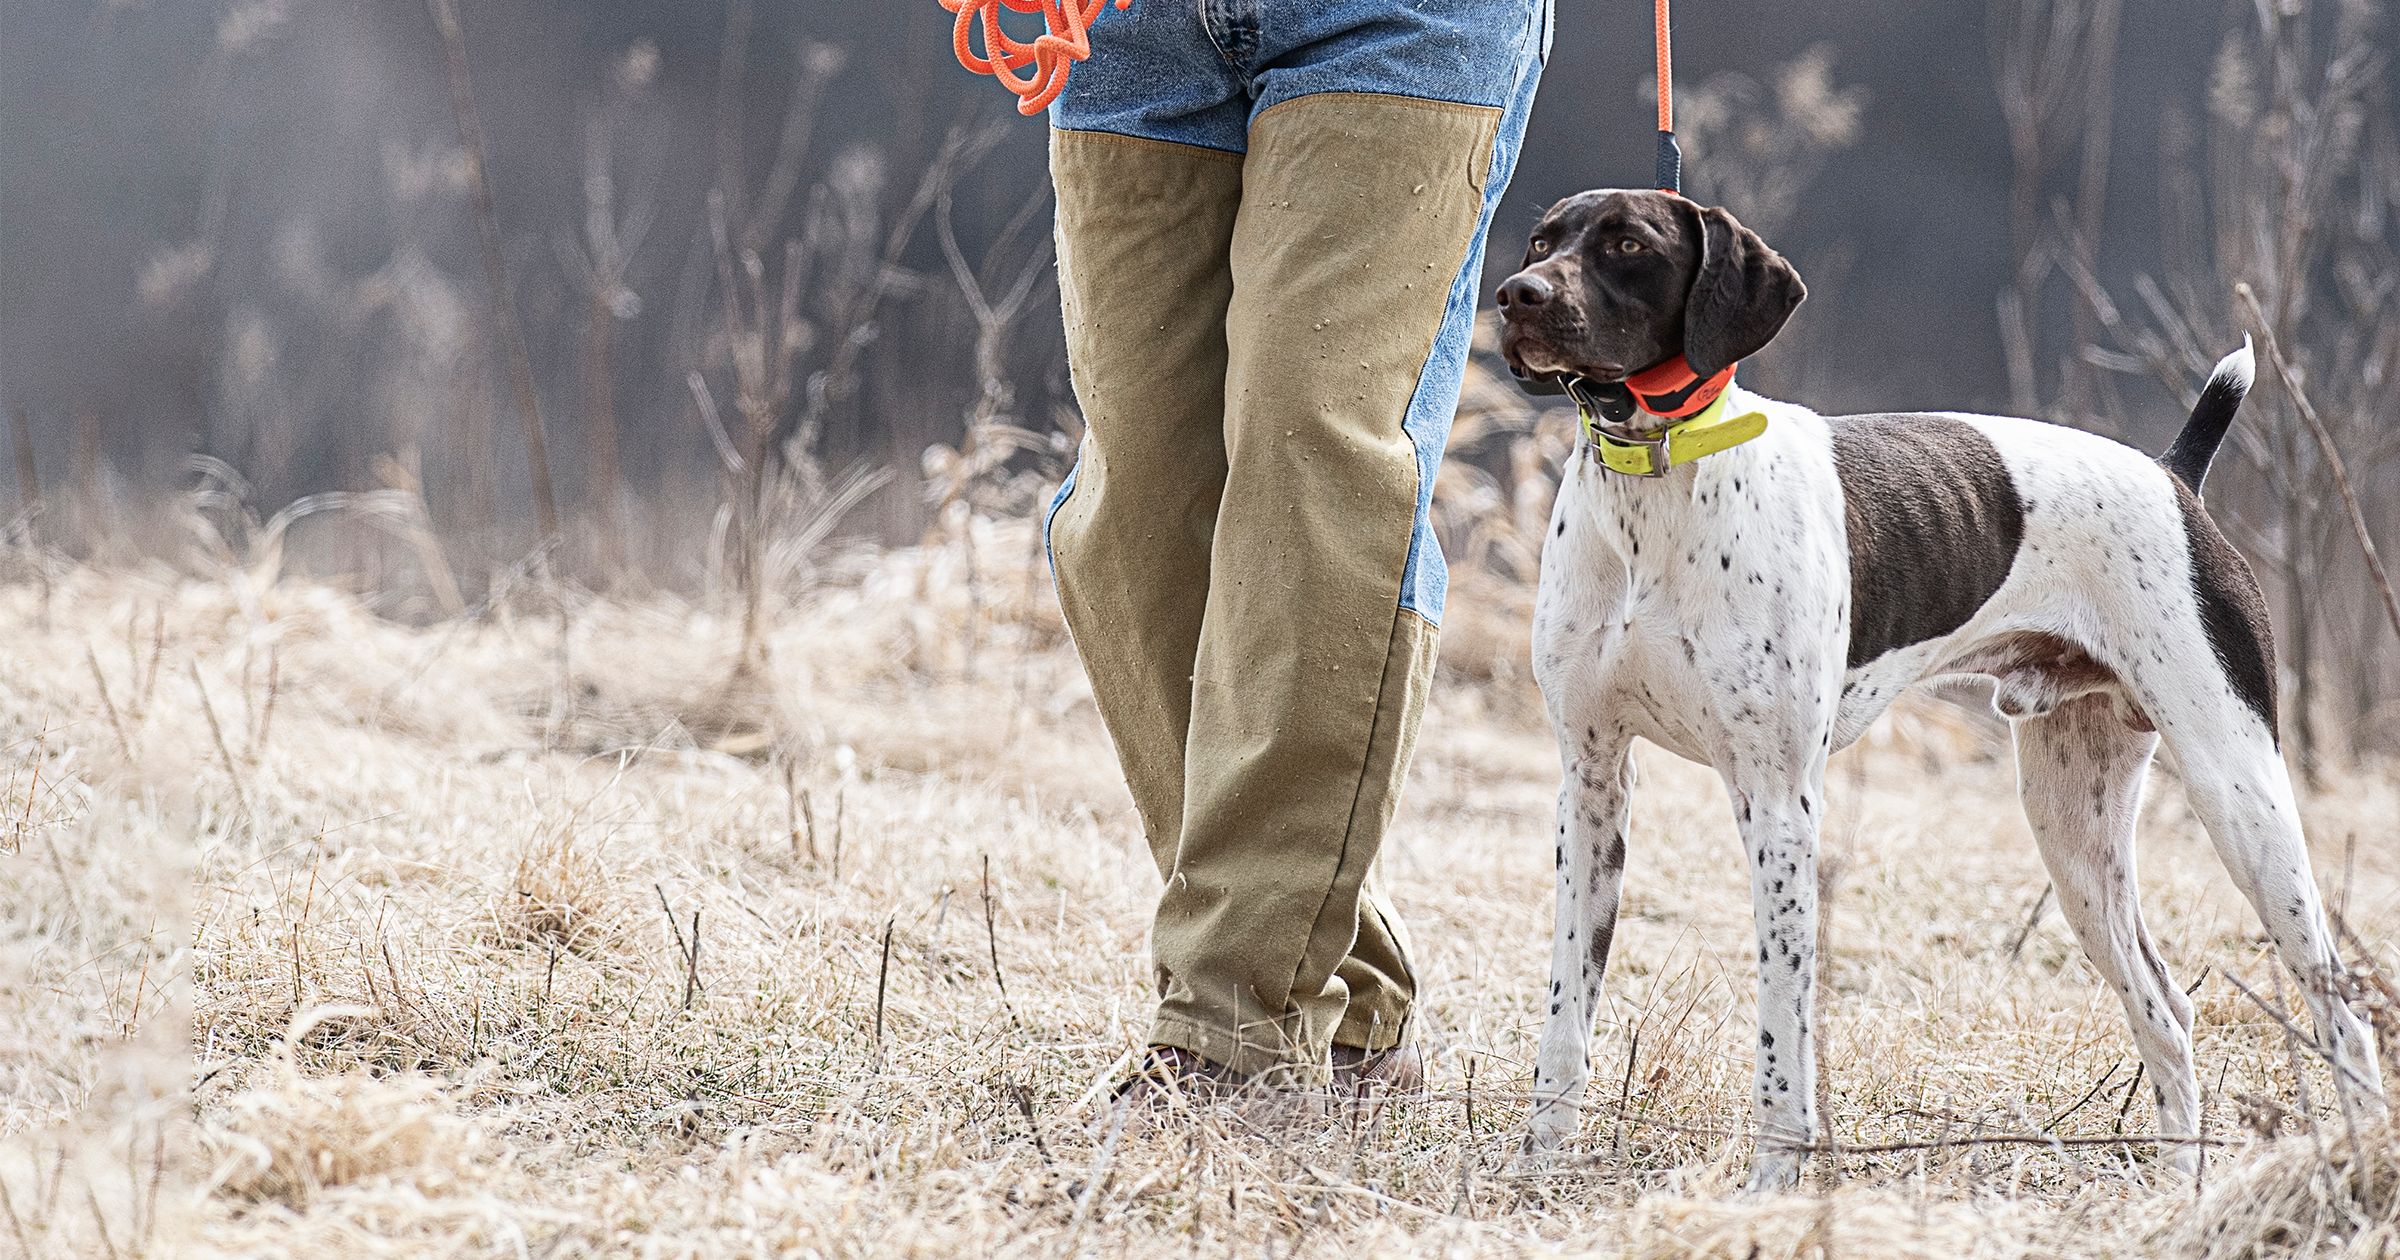 Hunting Dog Articles, History, Dog Training, Breeds - Page 3 of 8